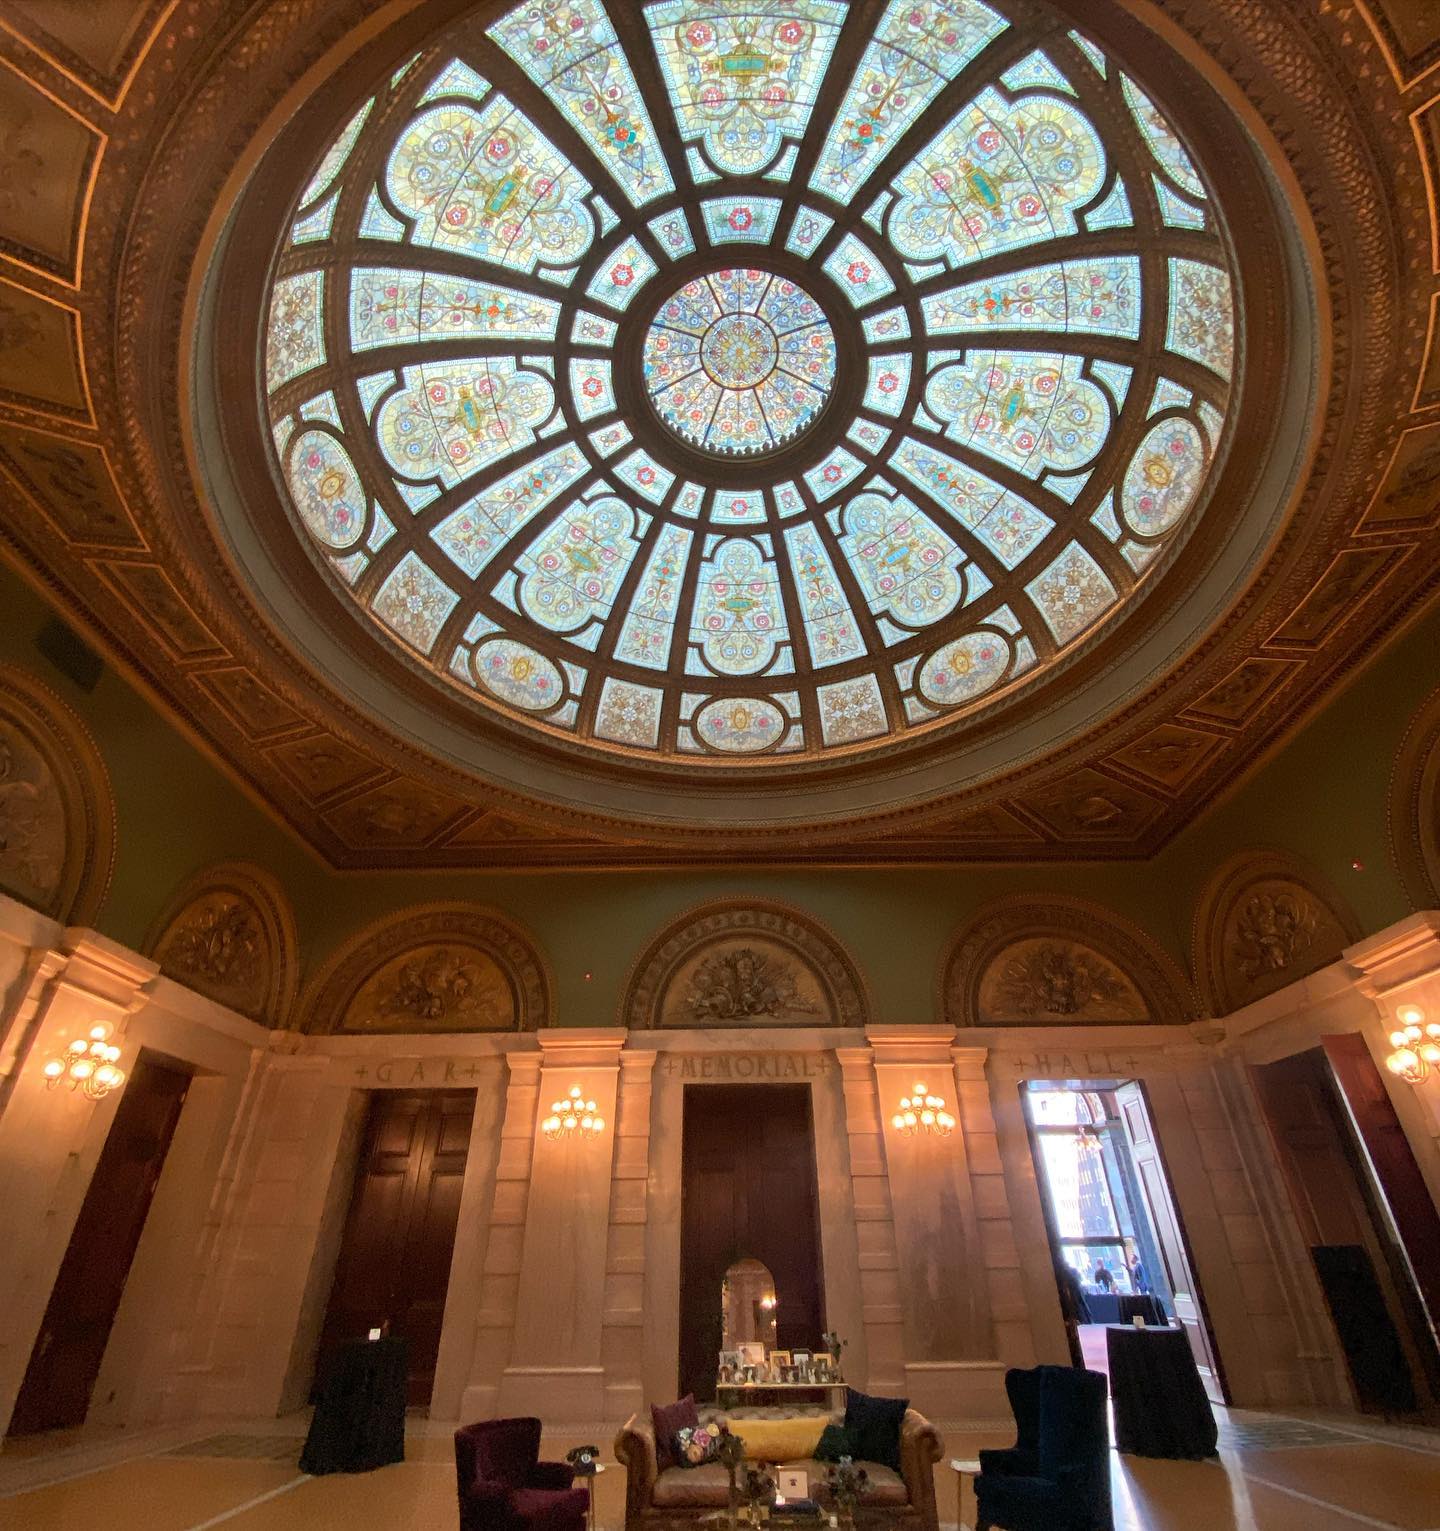 Have you seen the restored dome at the Cultural Center? It’s always been in the shadows of the Tiffany dome and now we see it with its original clarity and color. It’s breathtaking to see! #culturalcenter #stainedglass #restoration #explorechicago